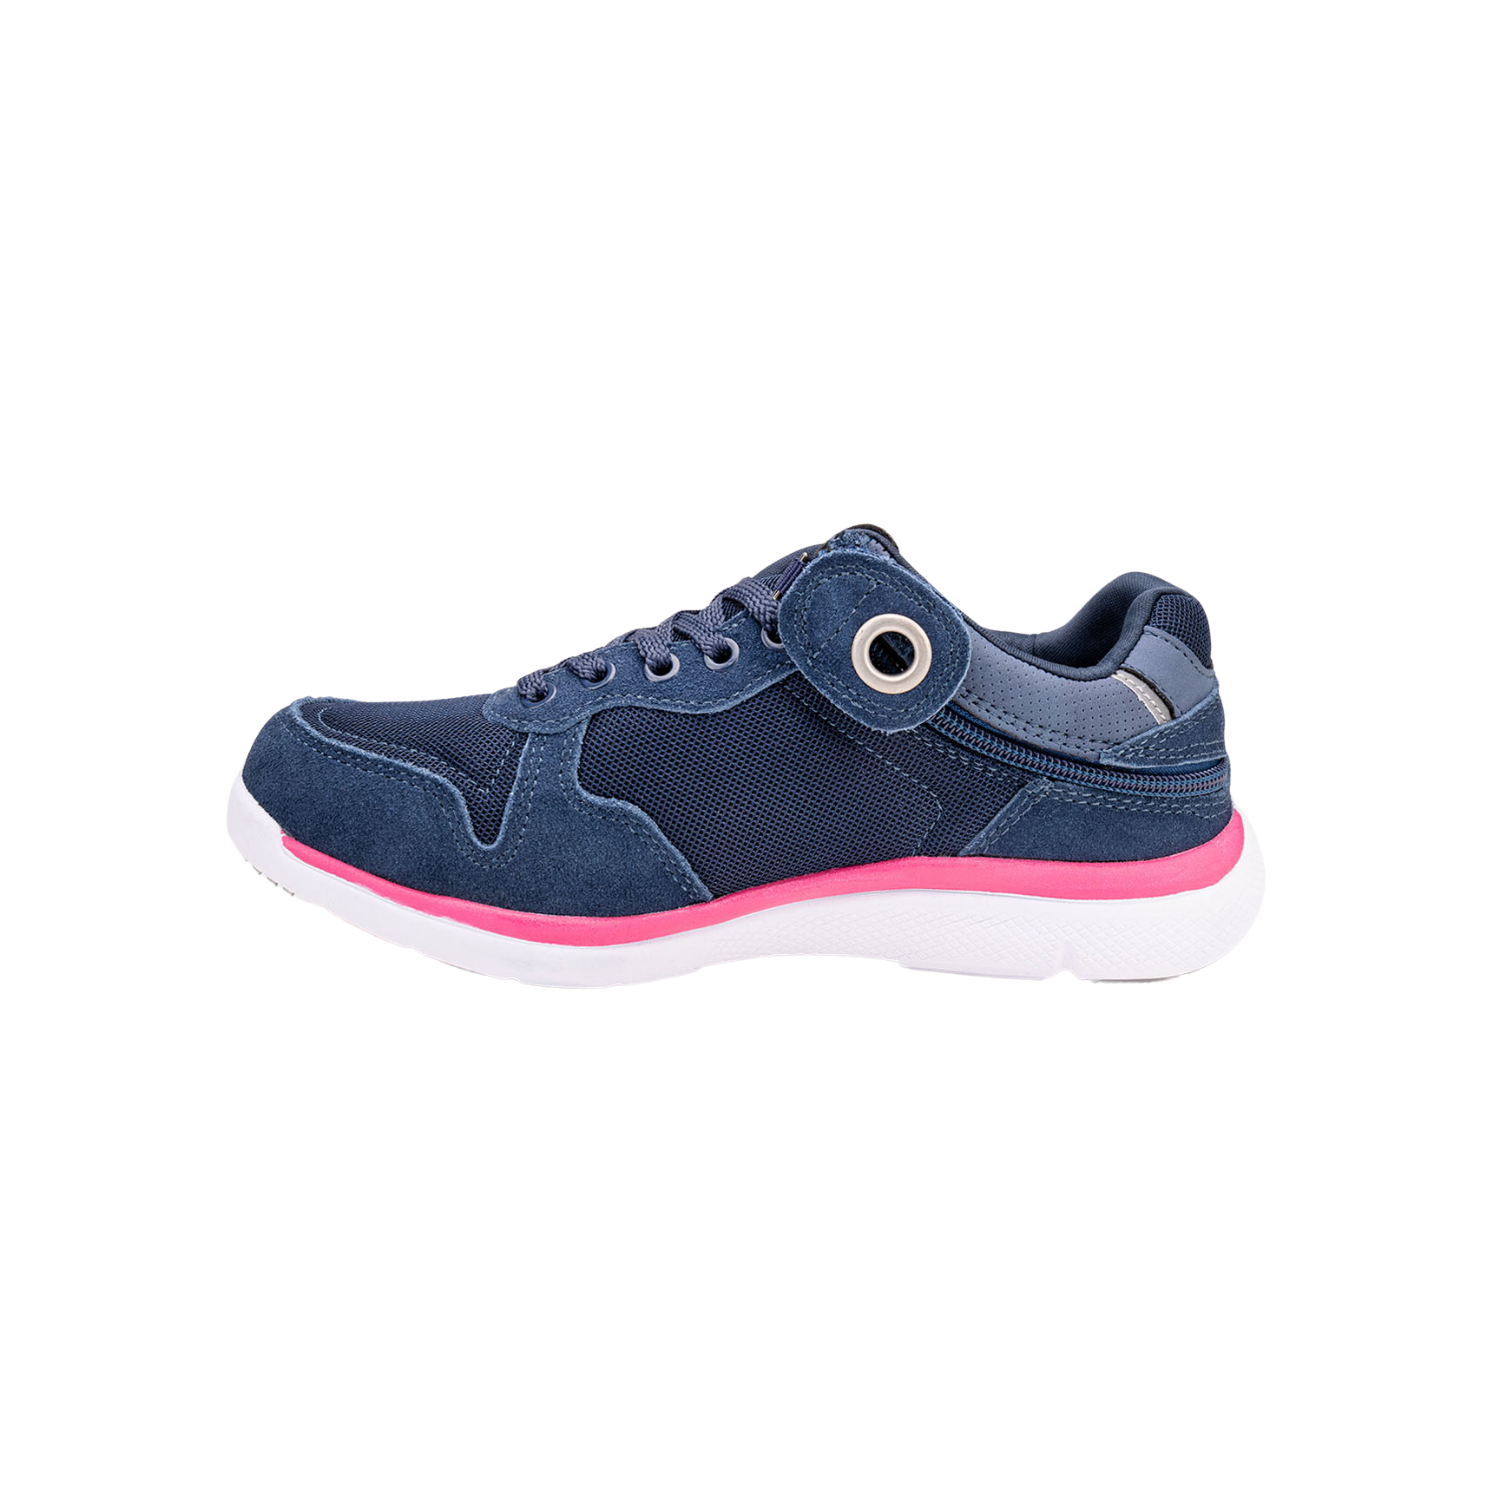 Women's Lightweight Cushioned Low Shoes with Rear Zipper Access